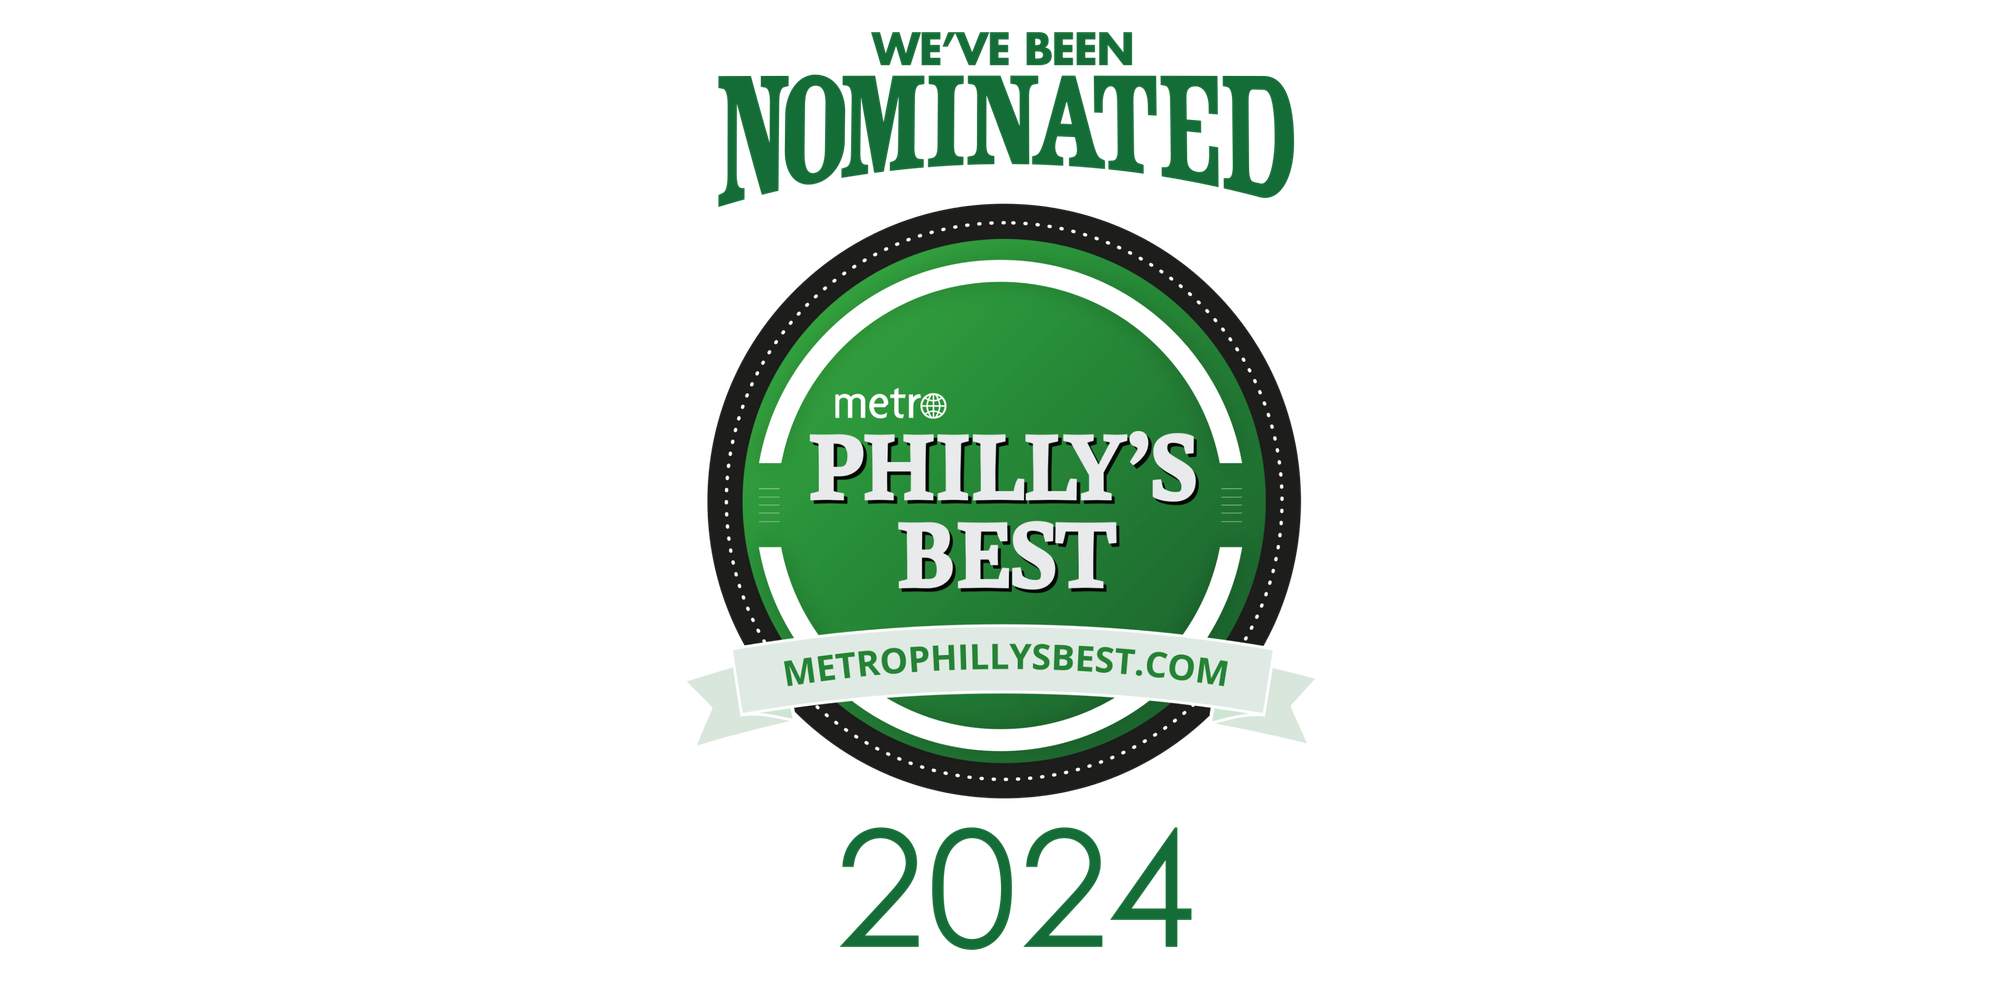 Lugg is nominated for Best Moving Company in Metro Philly's Best 2024!